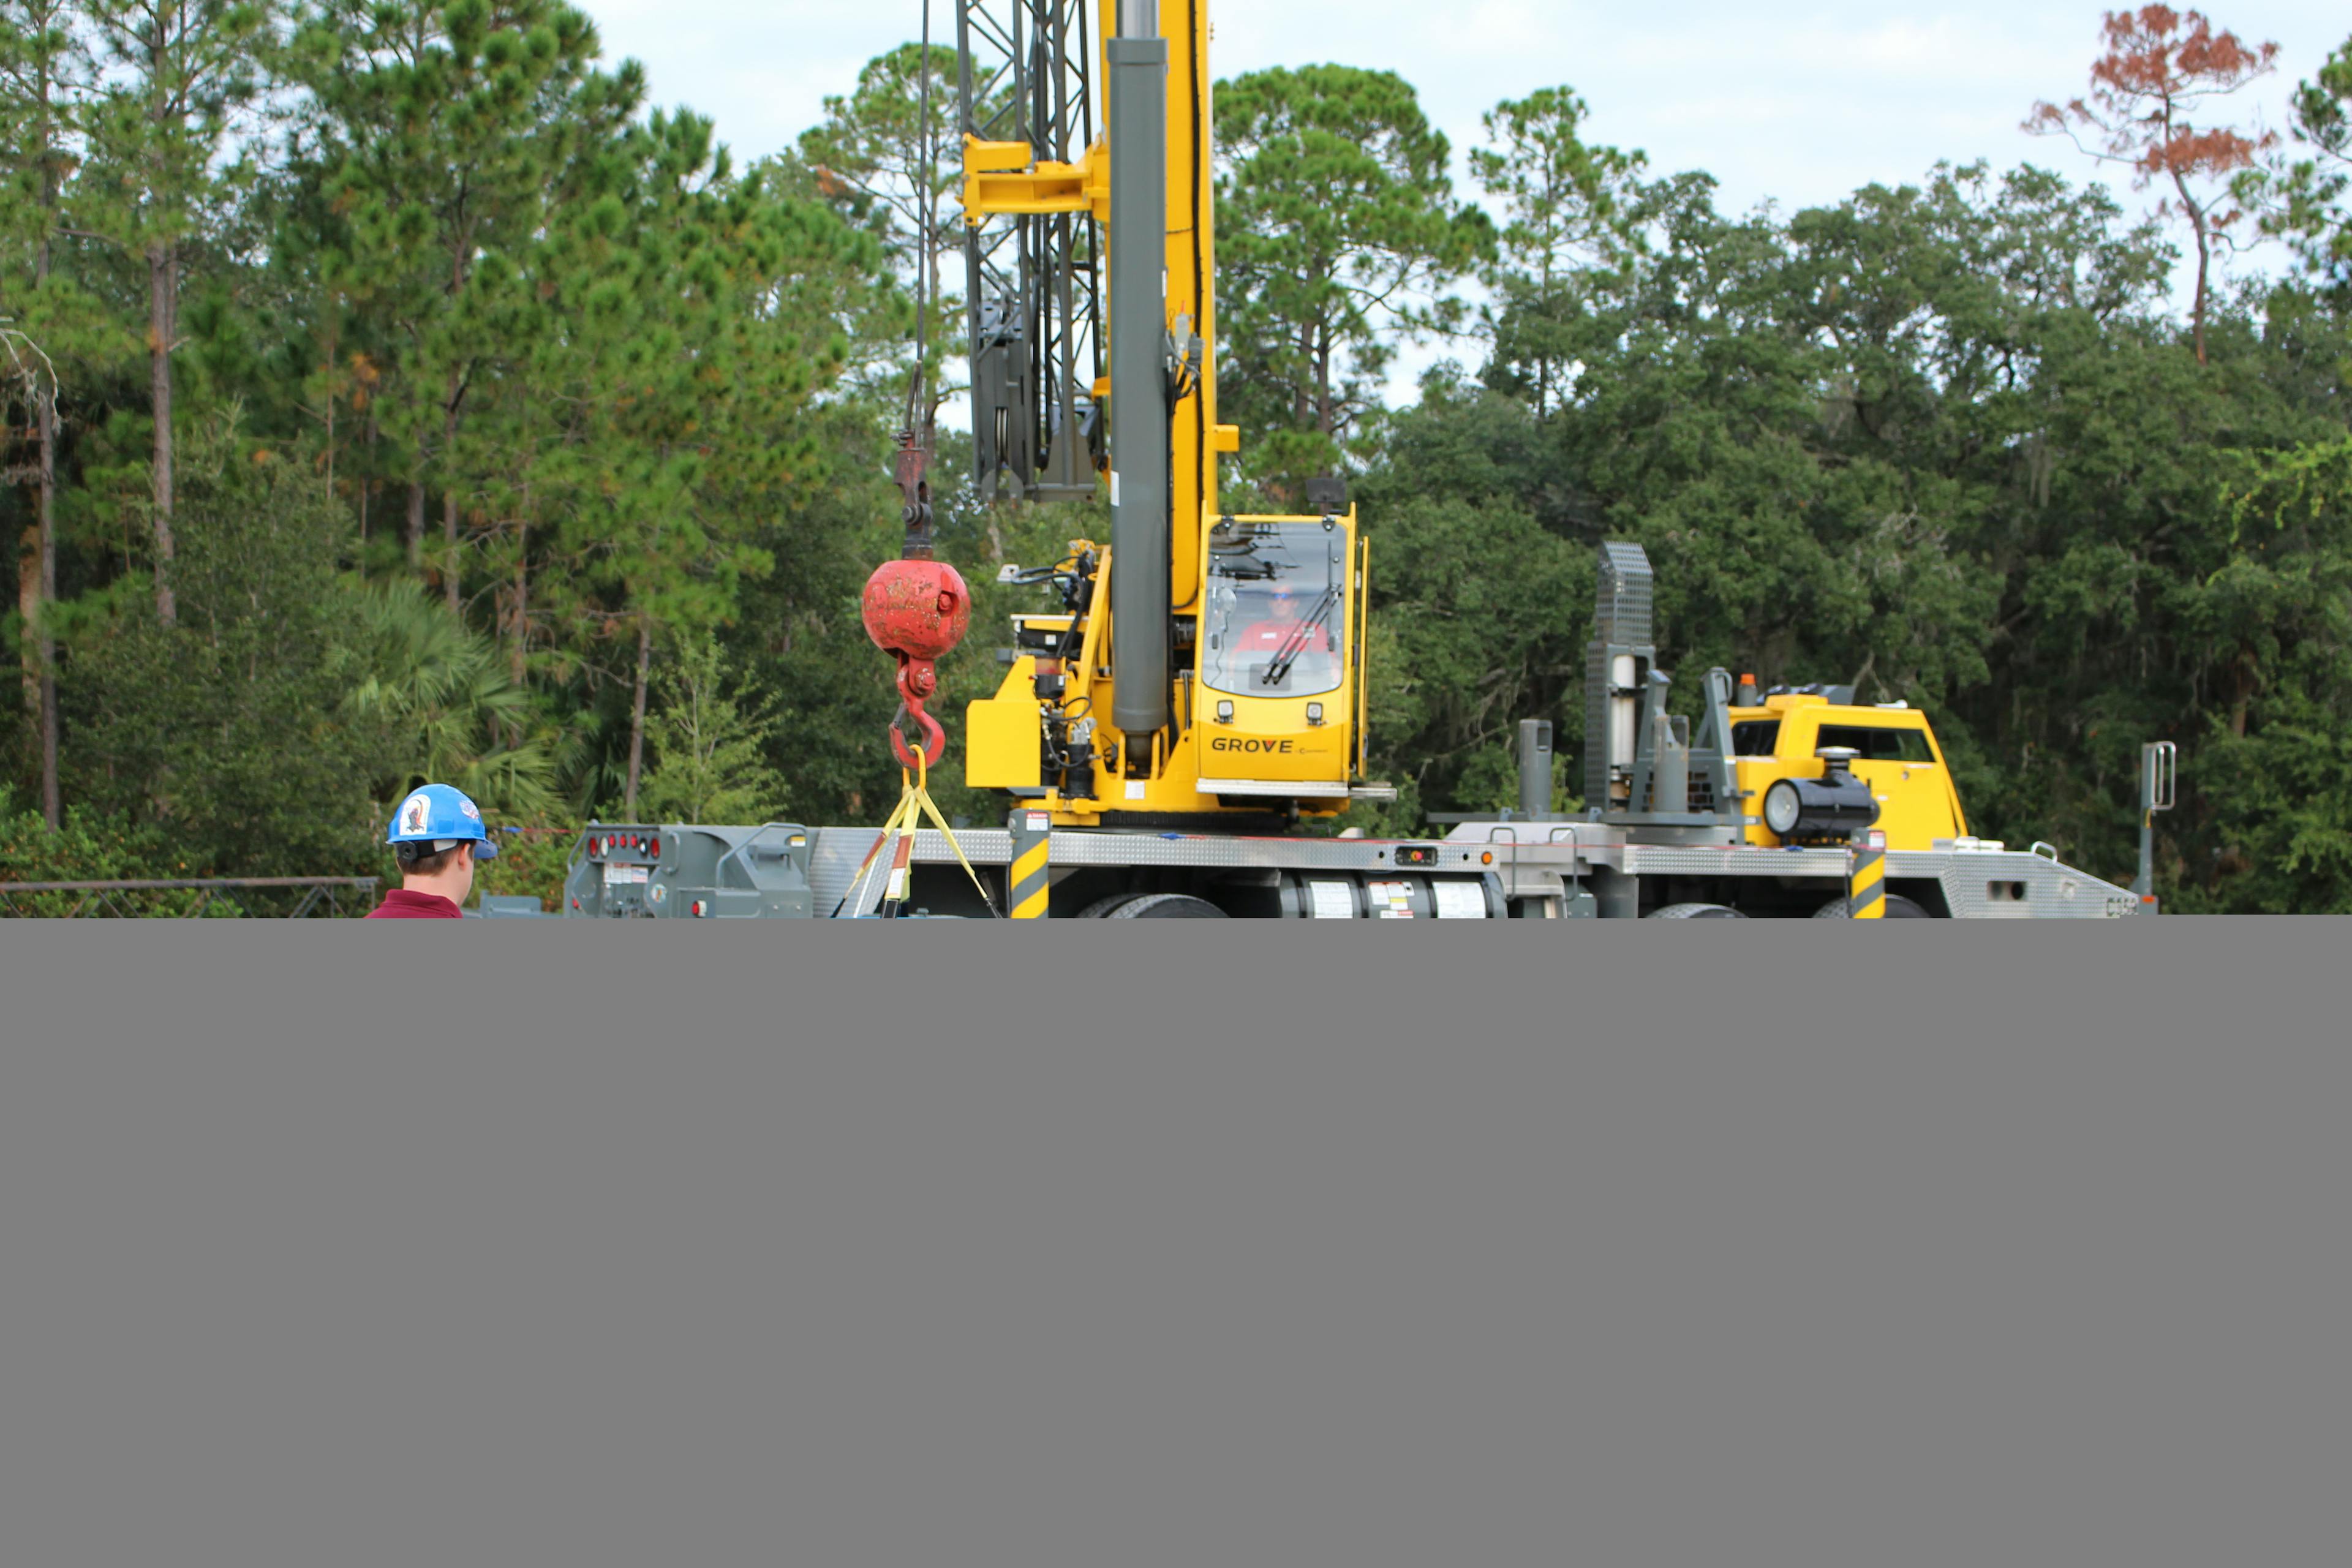 Crane Operators get Last Chance to Qualify for National Championship | Construction News